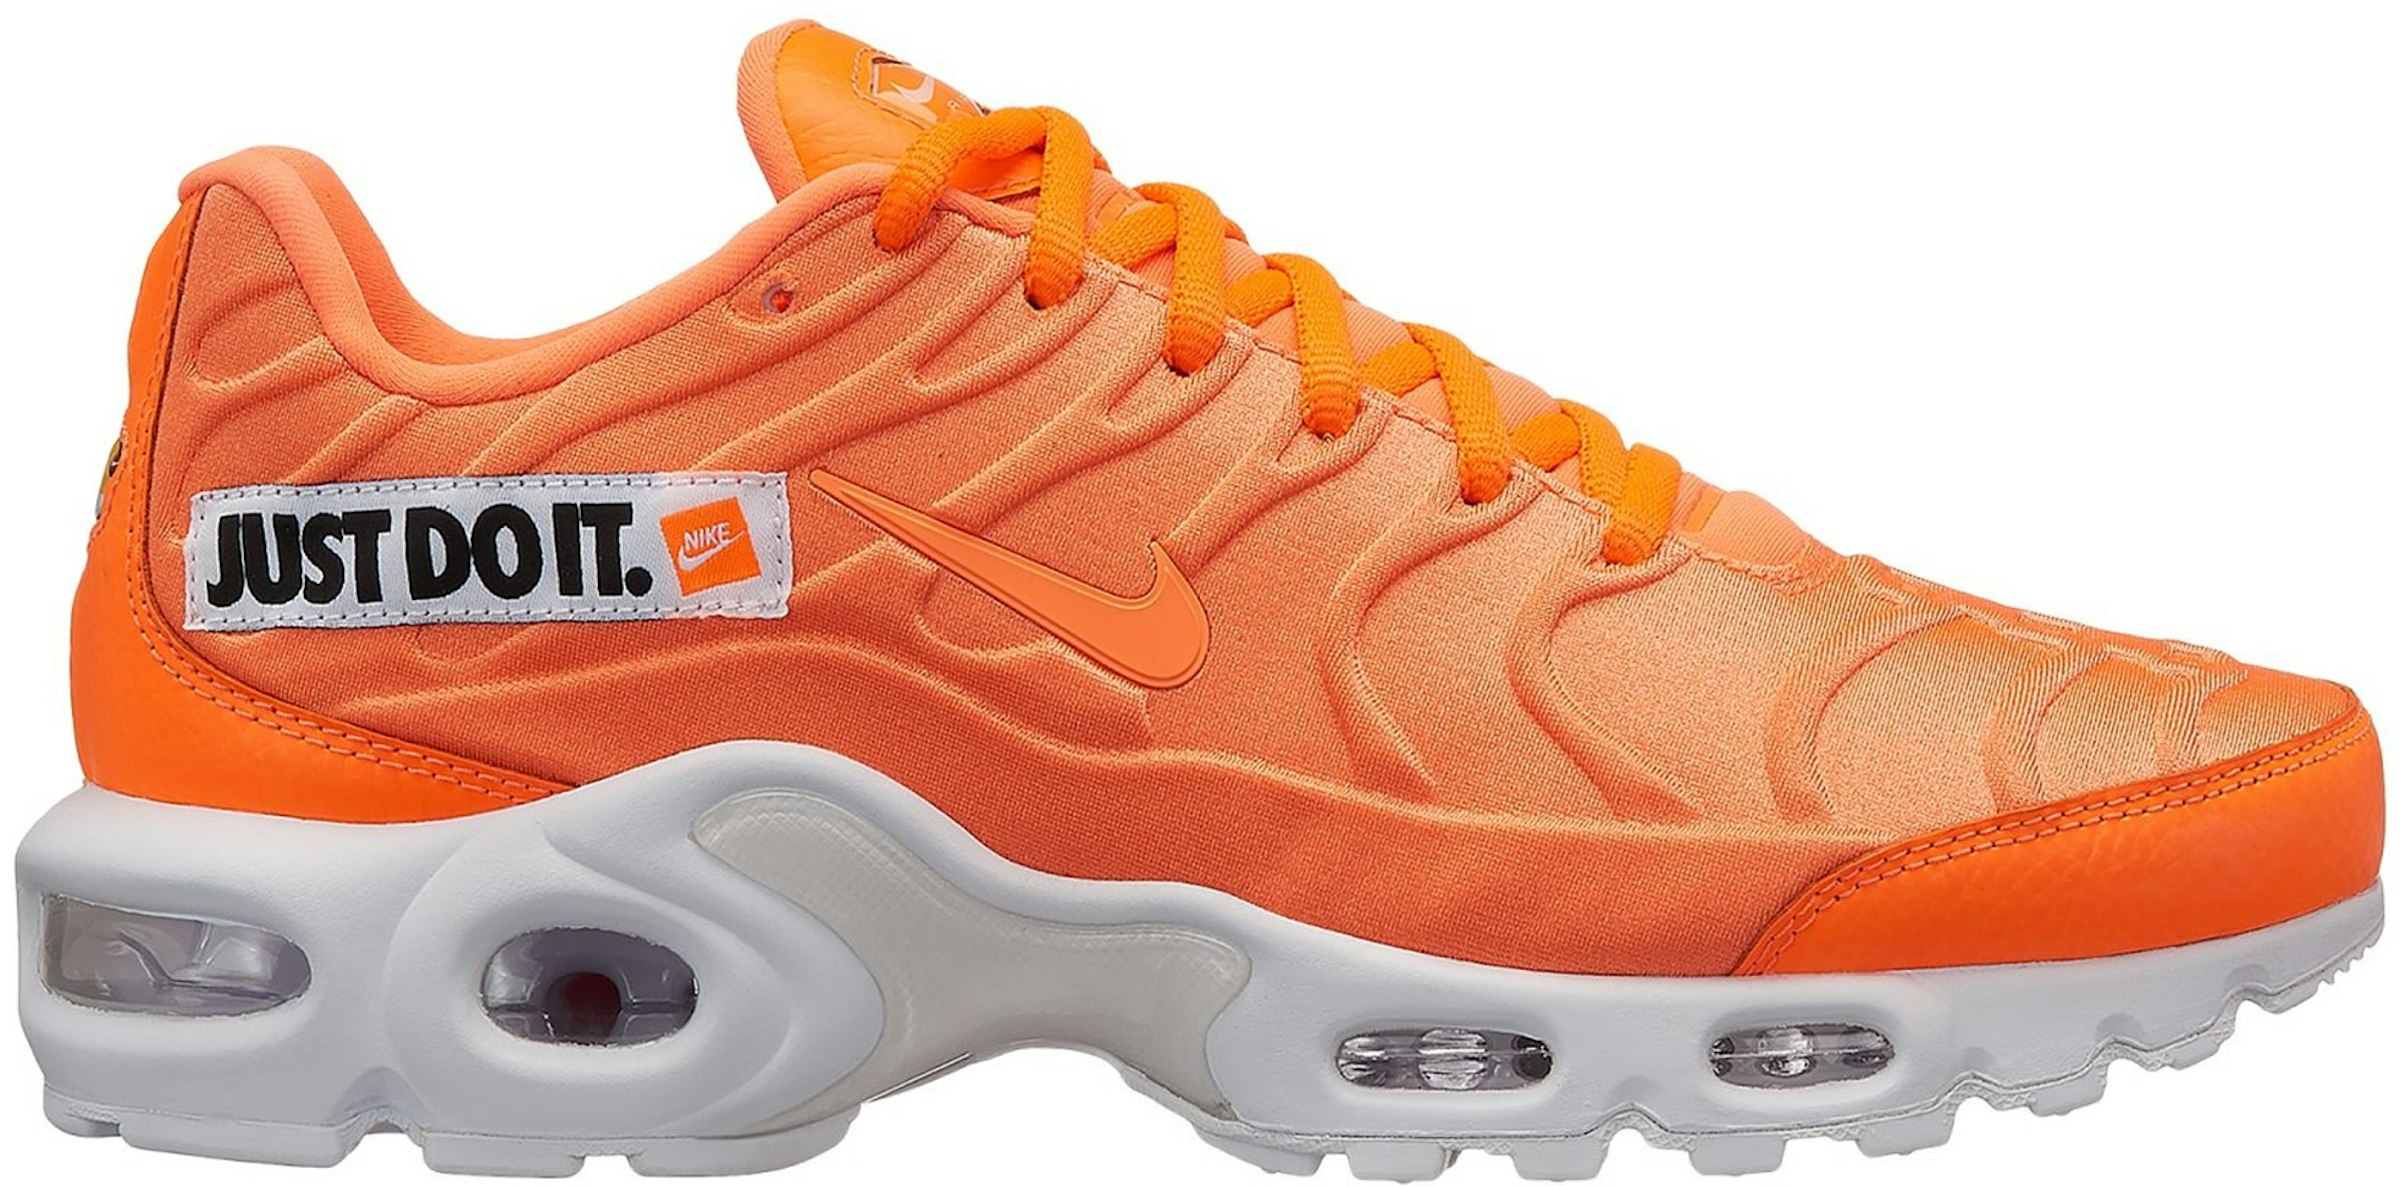 Nike Air Max Plus Just Do It (Women's) 862201-800 -